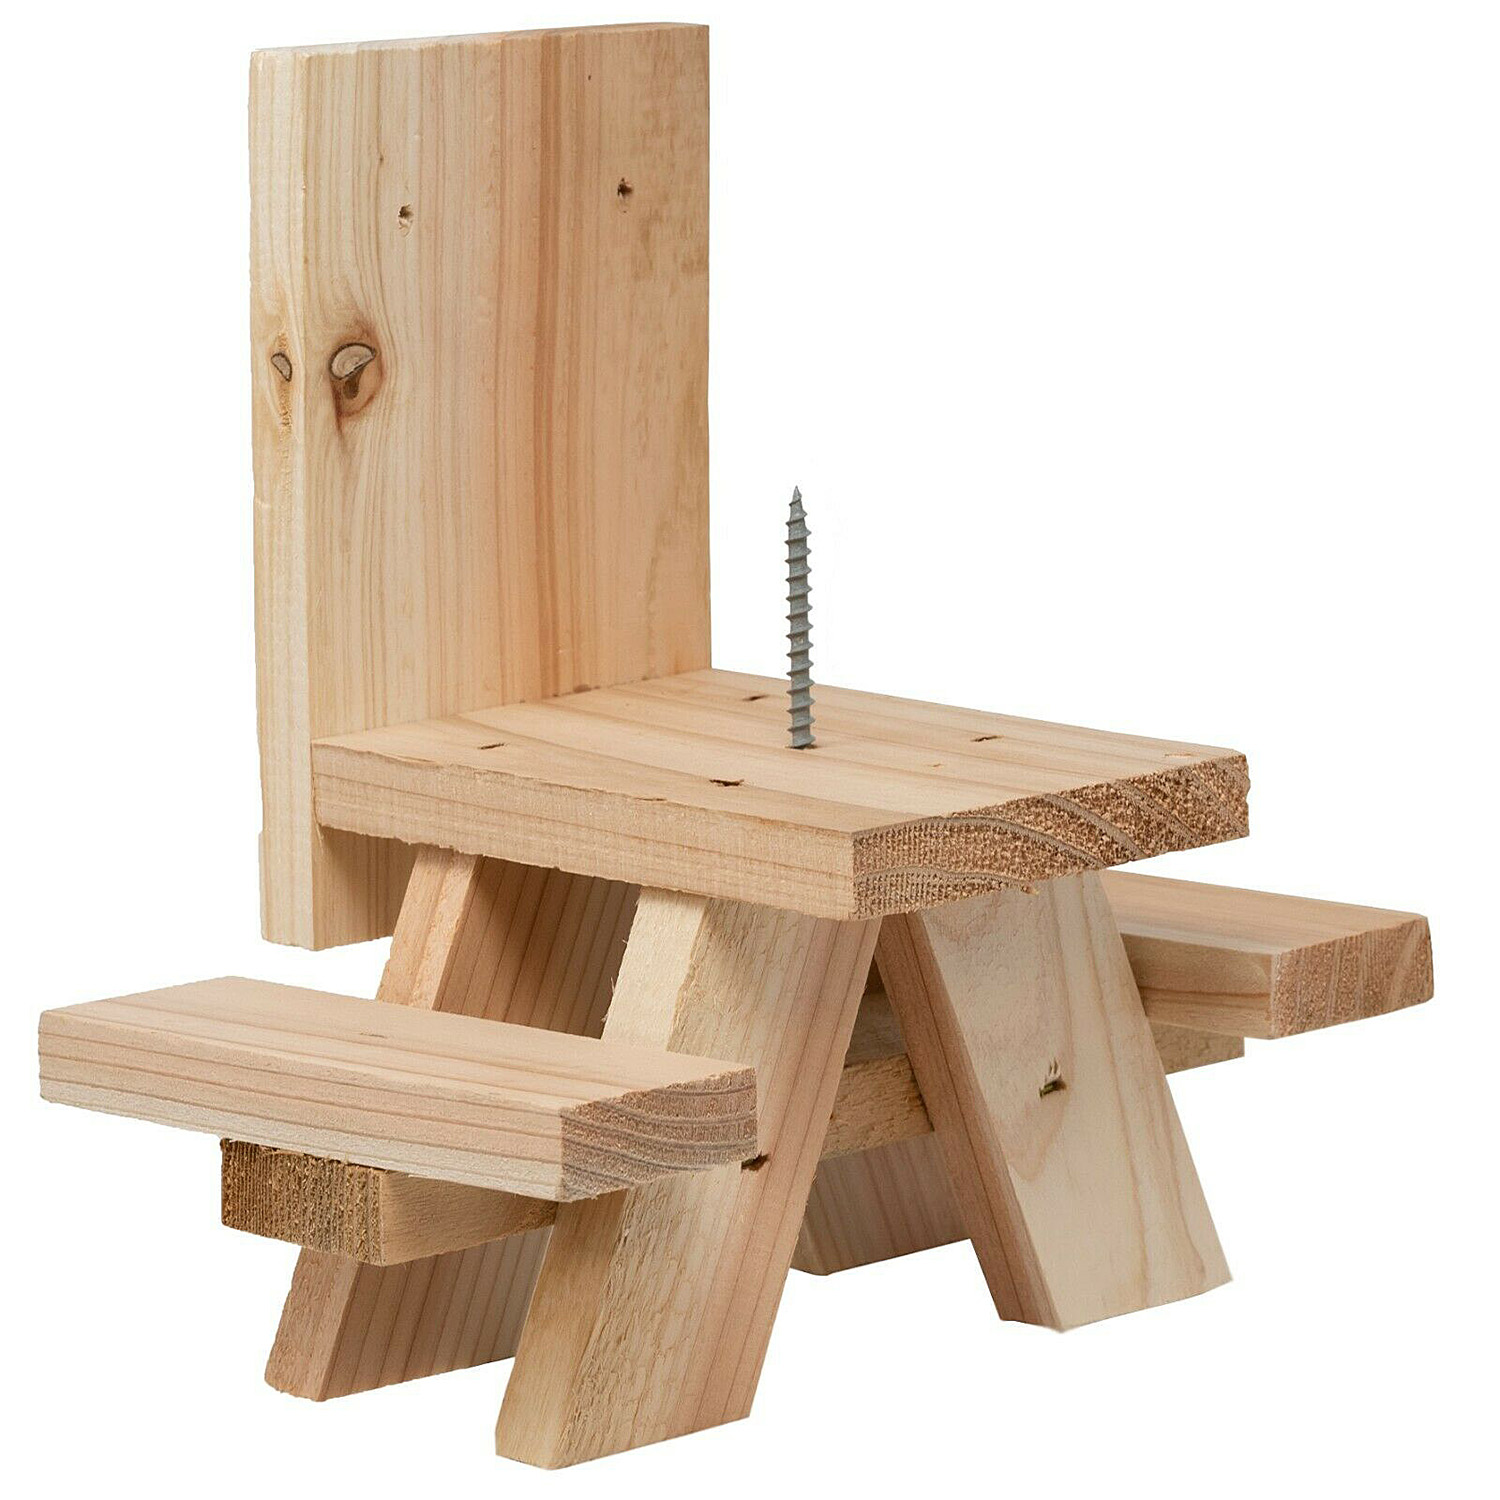 Build A Squirrel Picnic Table Kit With Corn Holder Chirp Nature Center